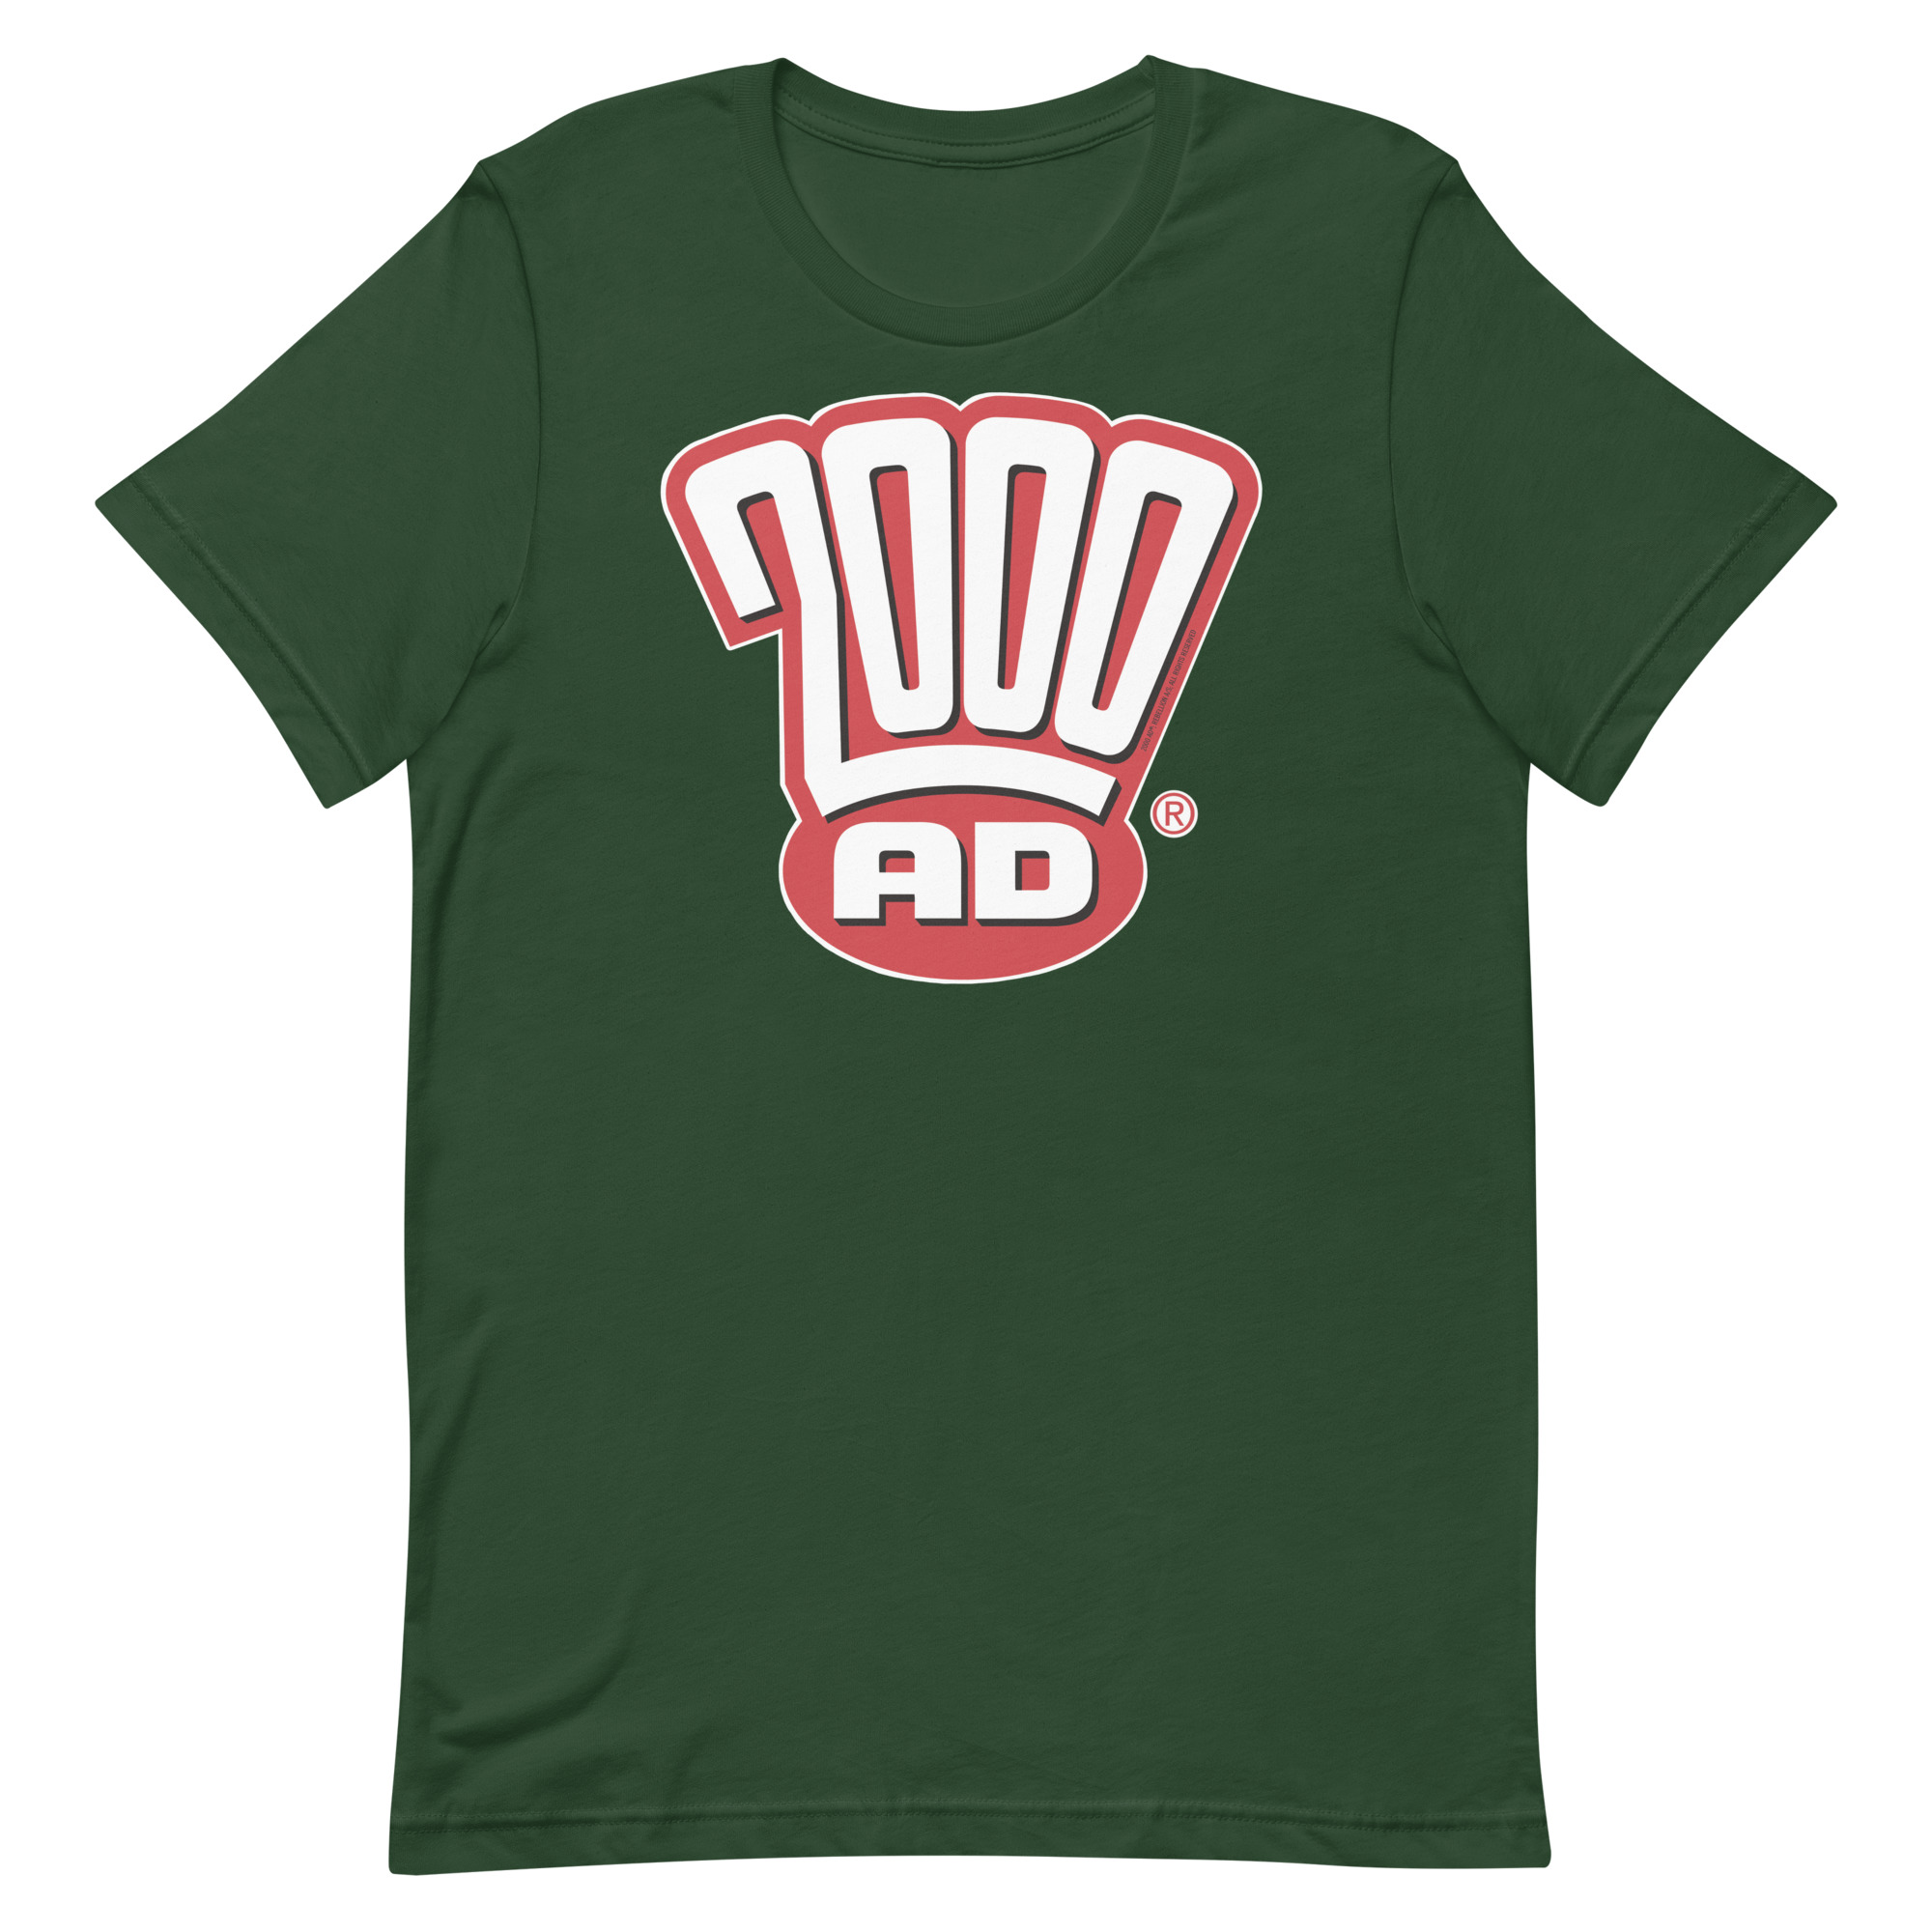 Image of a Forest Green coloured 2000AD - The Modern Era t-shirt featuring a large 2000AD - The Modern Era logo in the middle